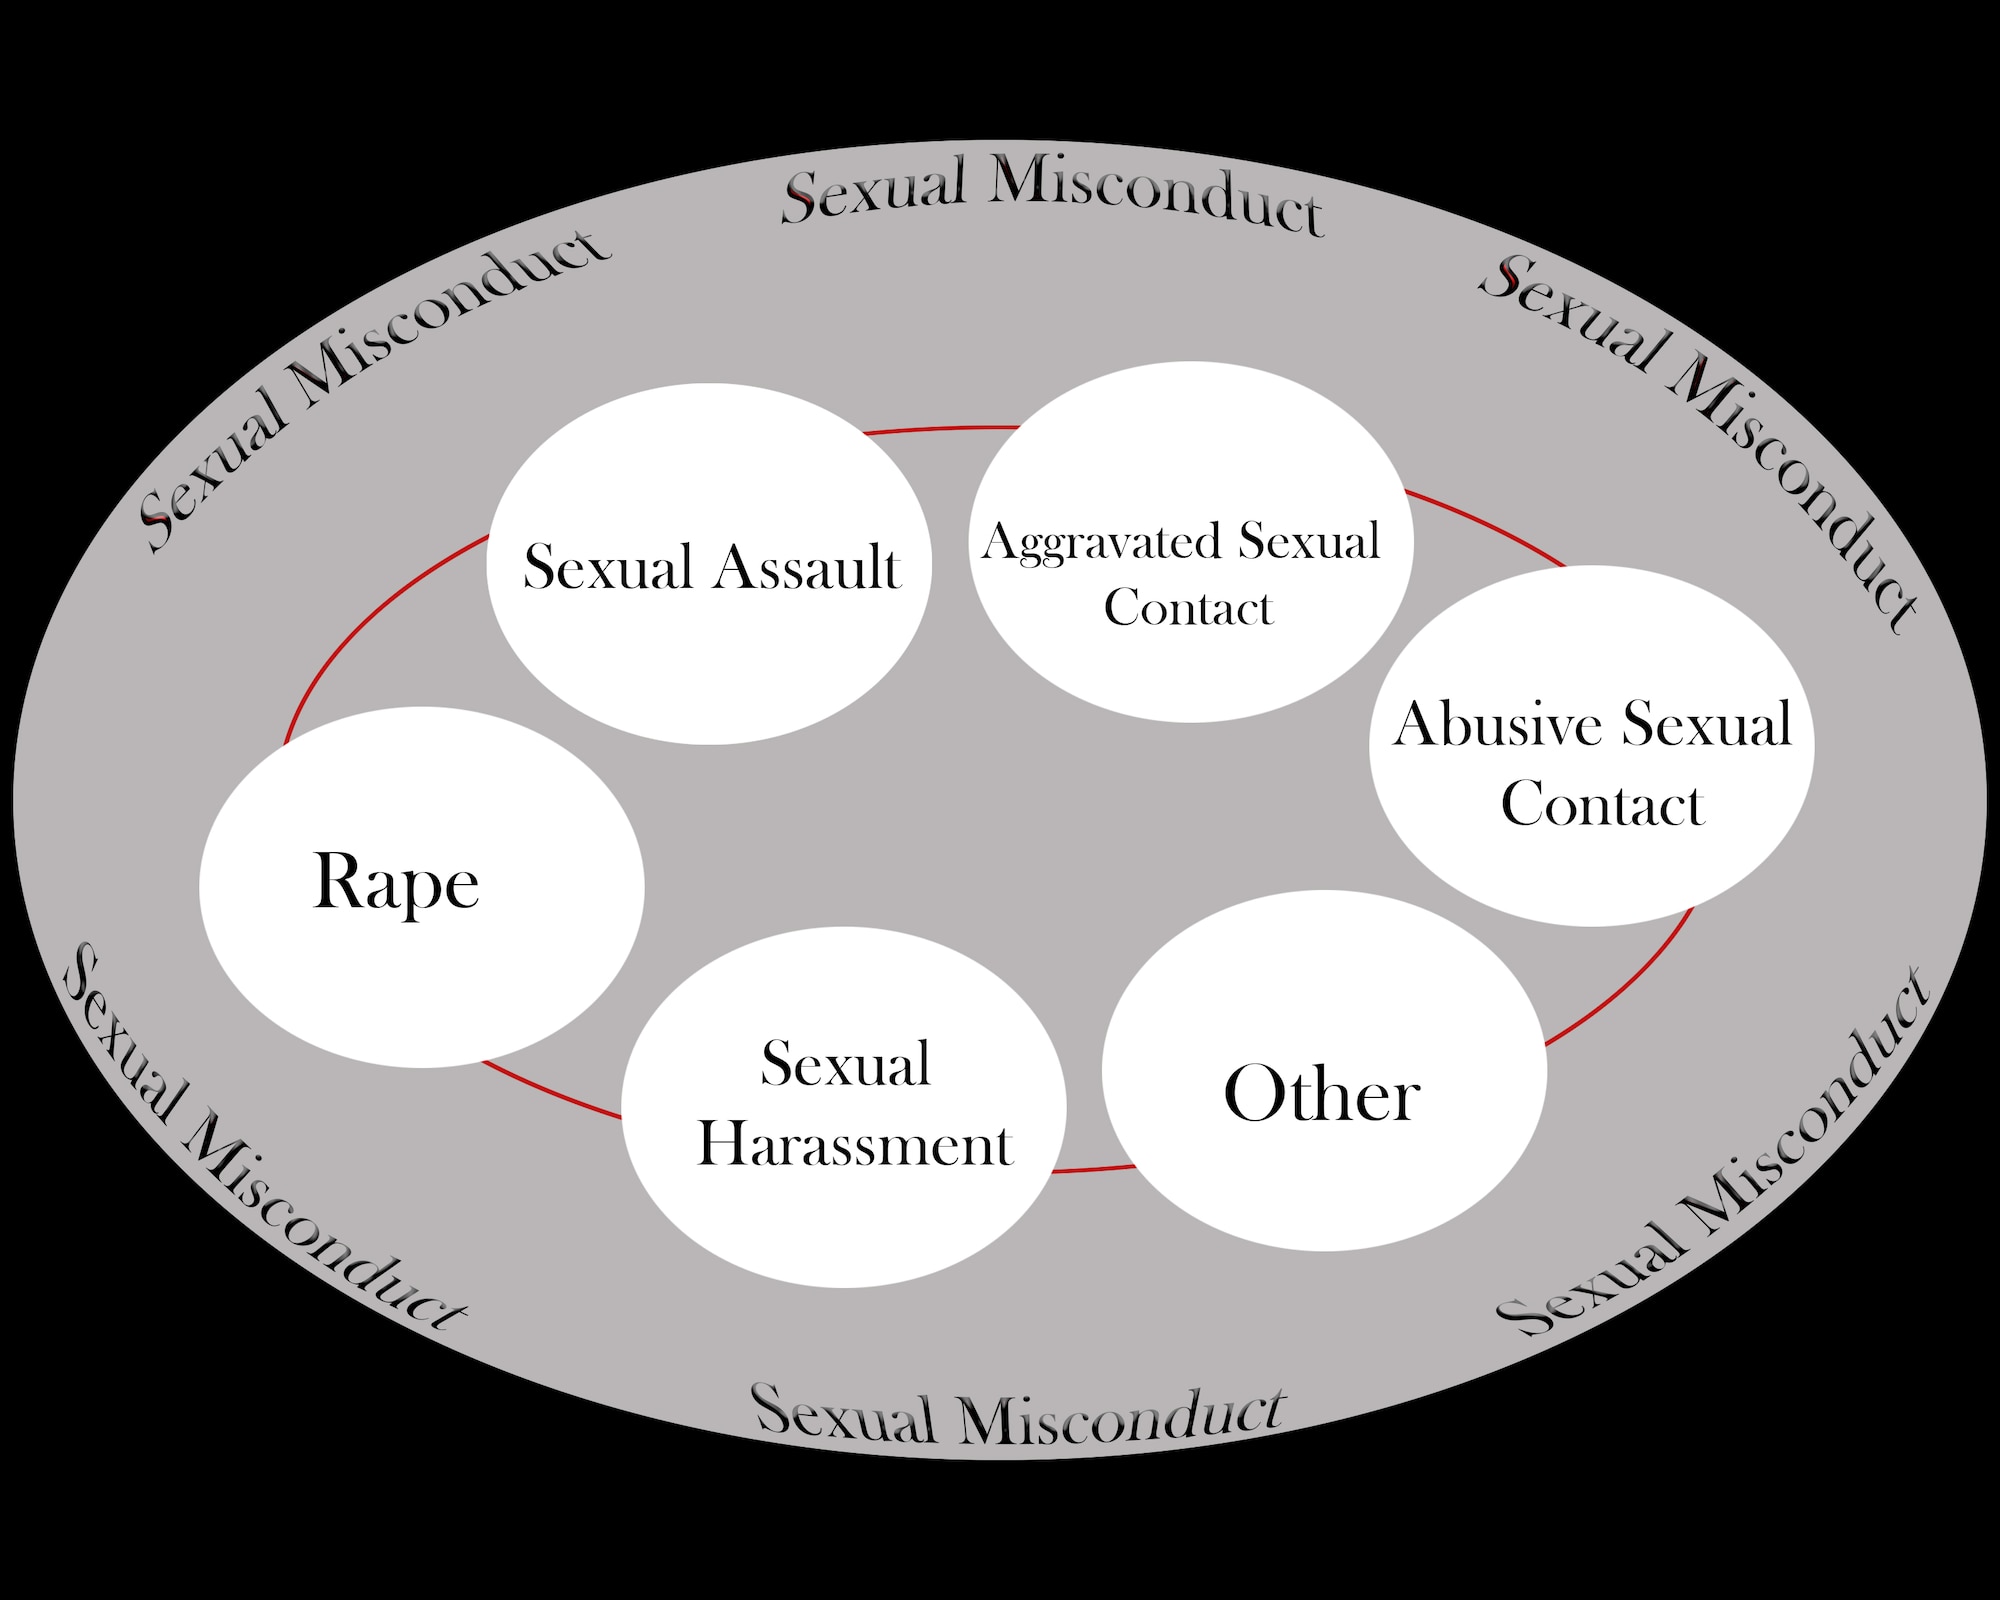 Sexual misconduct is any unwelcomed behavior of a sexual nature committed without consent or by force. This is where sexual assault, sexual harassment, sexual contact, consent, aggravated sexual assualt are categorized.